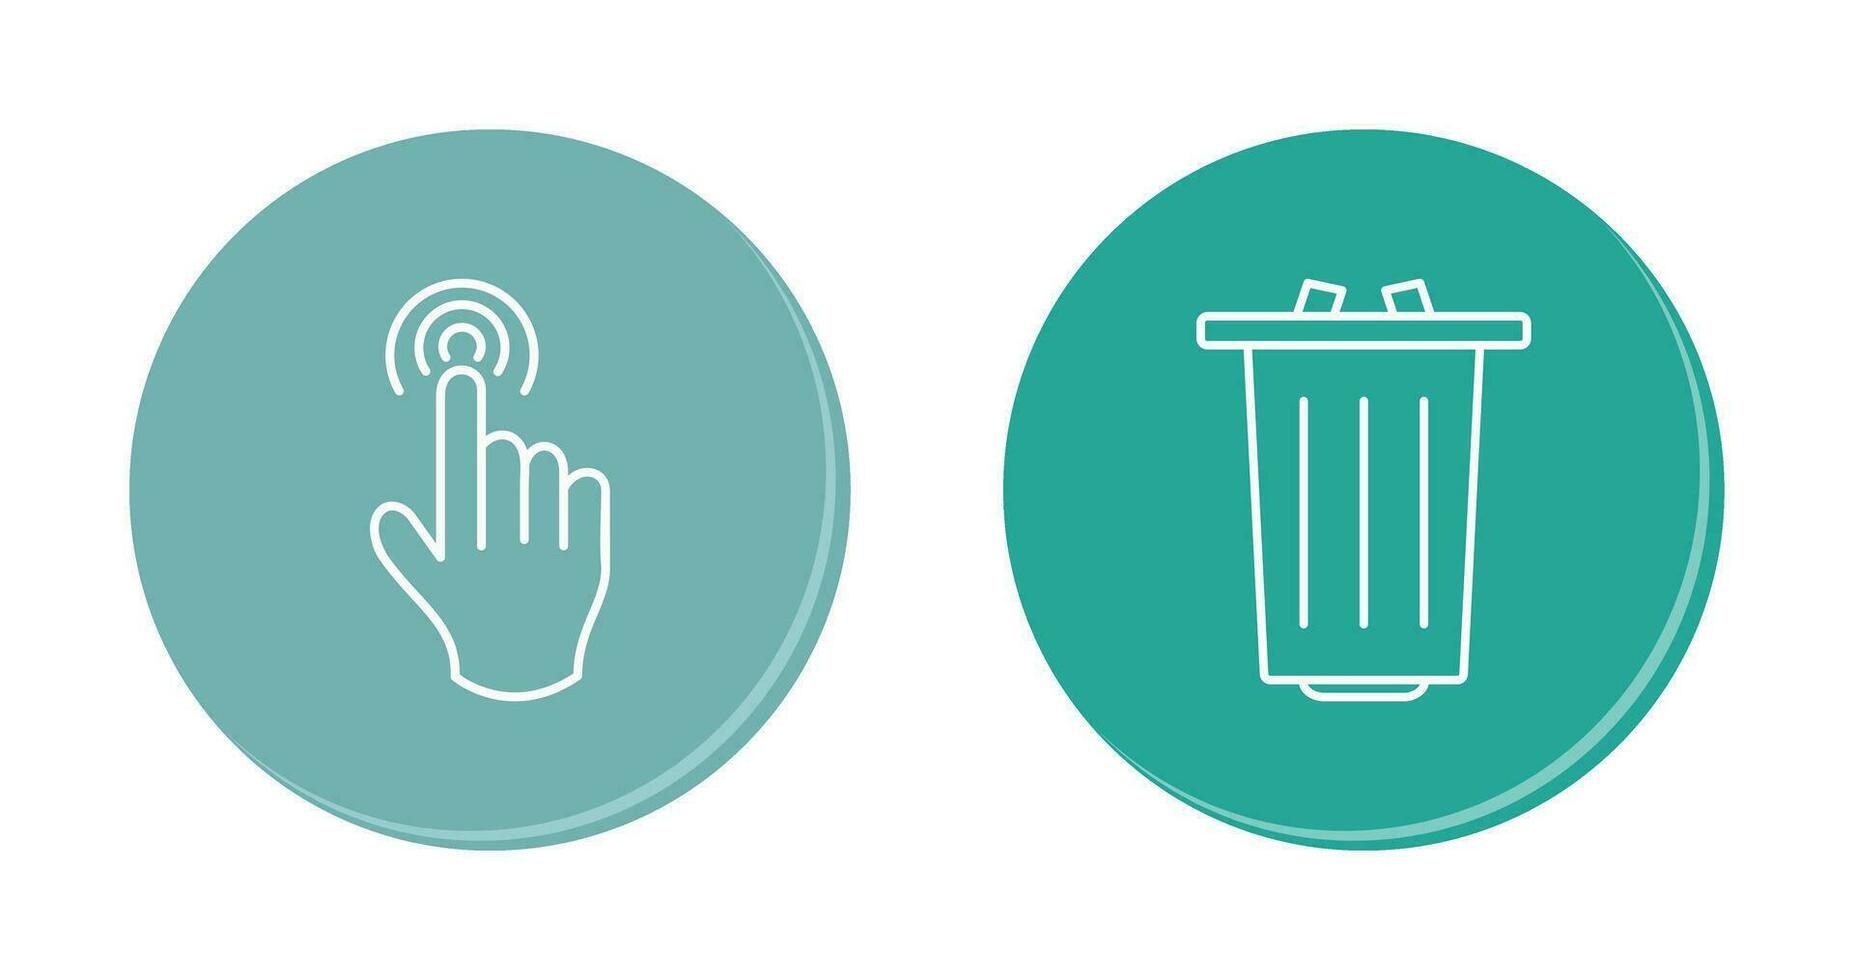 danger of hand press and garbage Icon vector